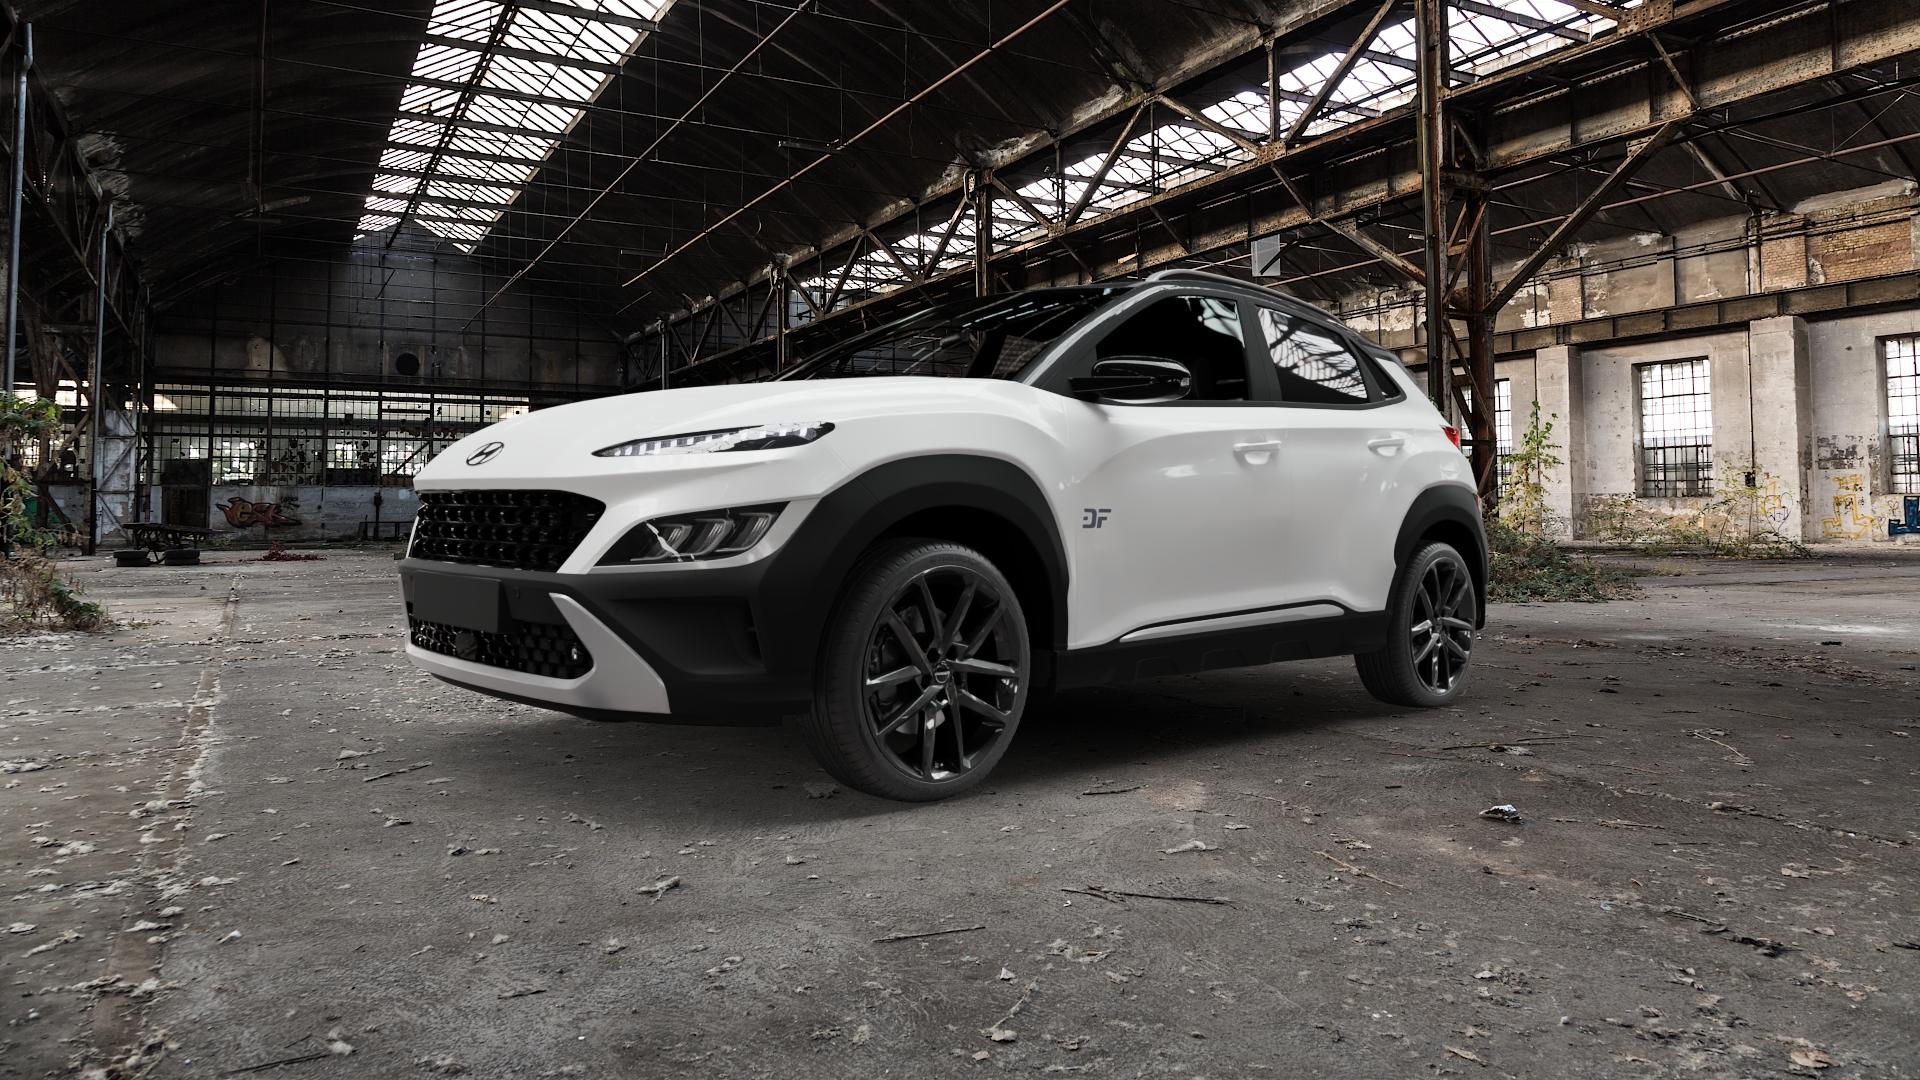 Hyundai Kona Type OS Facelift 1,6l CRDi AWD 100kW Mild-Hybrid (136 hp)  Wheels and Tyre Packages